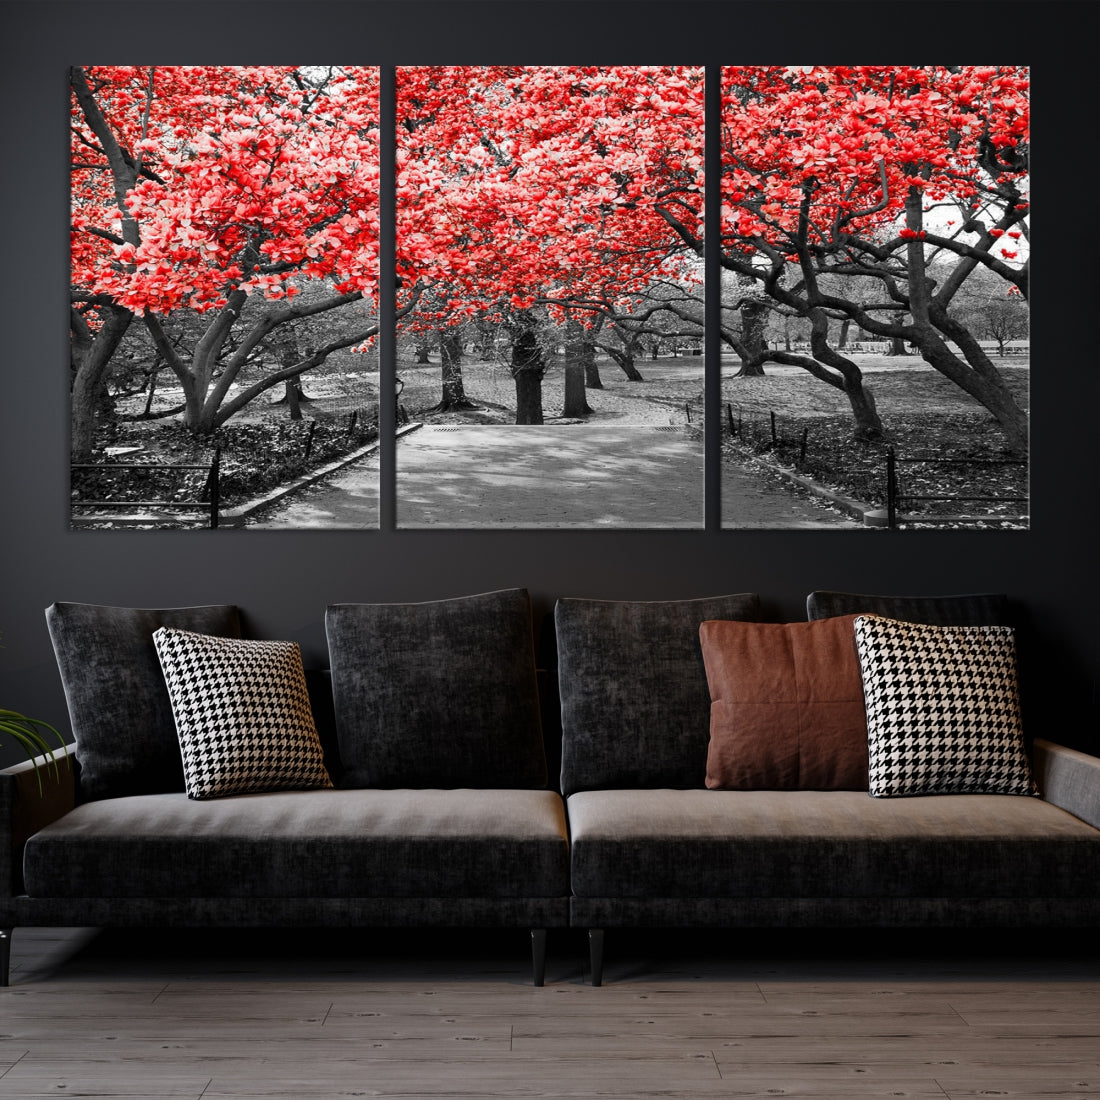 Pink Cherry Blossoms Canvas Wall Art Print Pink Flowers Large Canvas Art Print Blossoms Wall Decor Floral Canvas Artwork for Living Room Dining Room Kitchen Home Decoration Framed Landscape Print